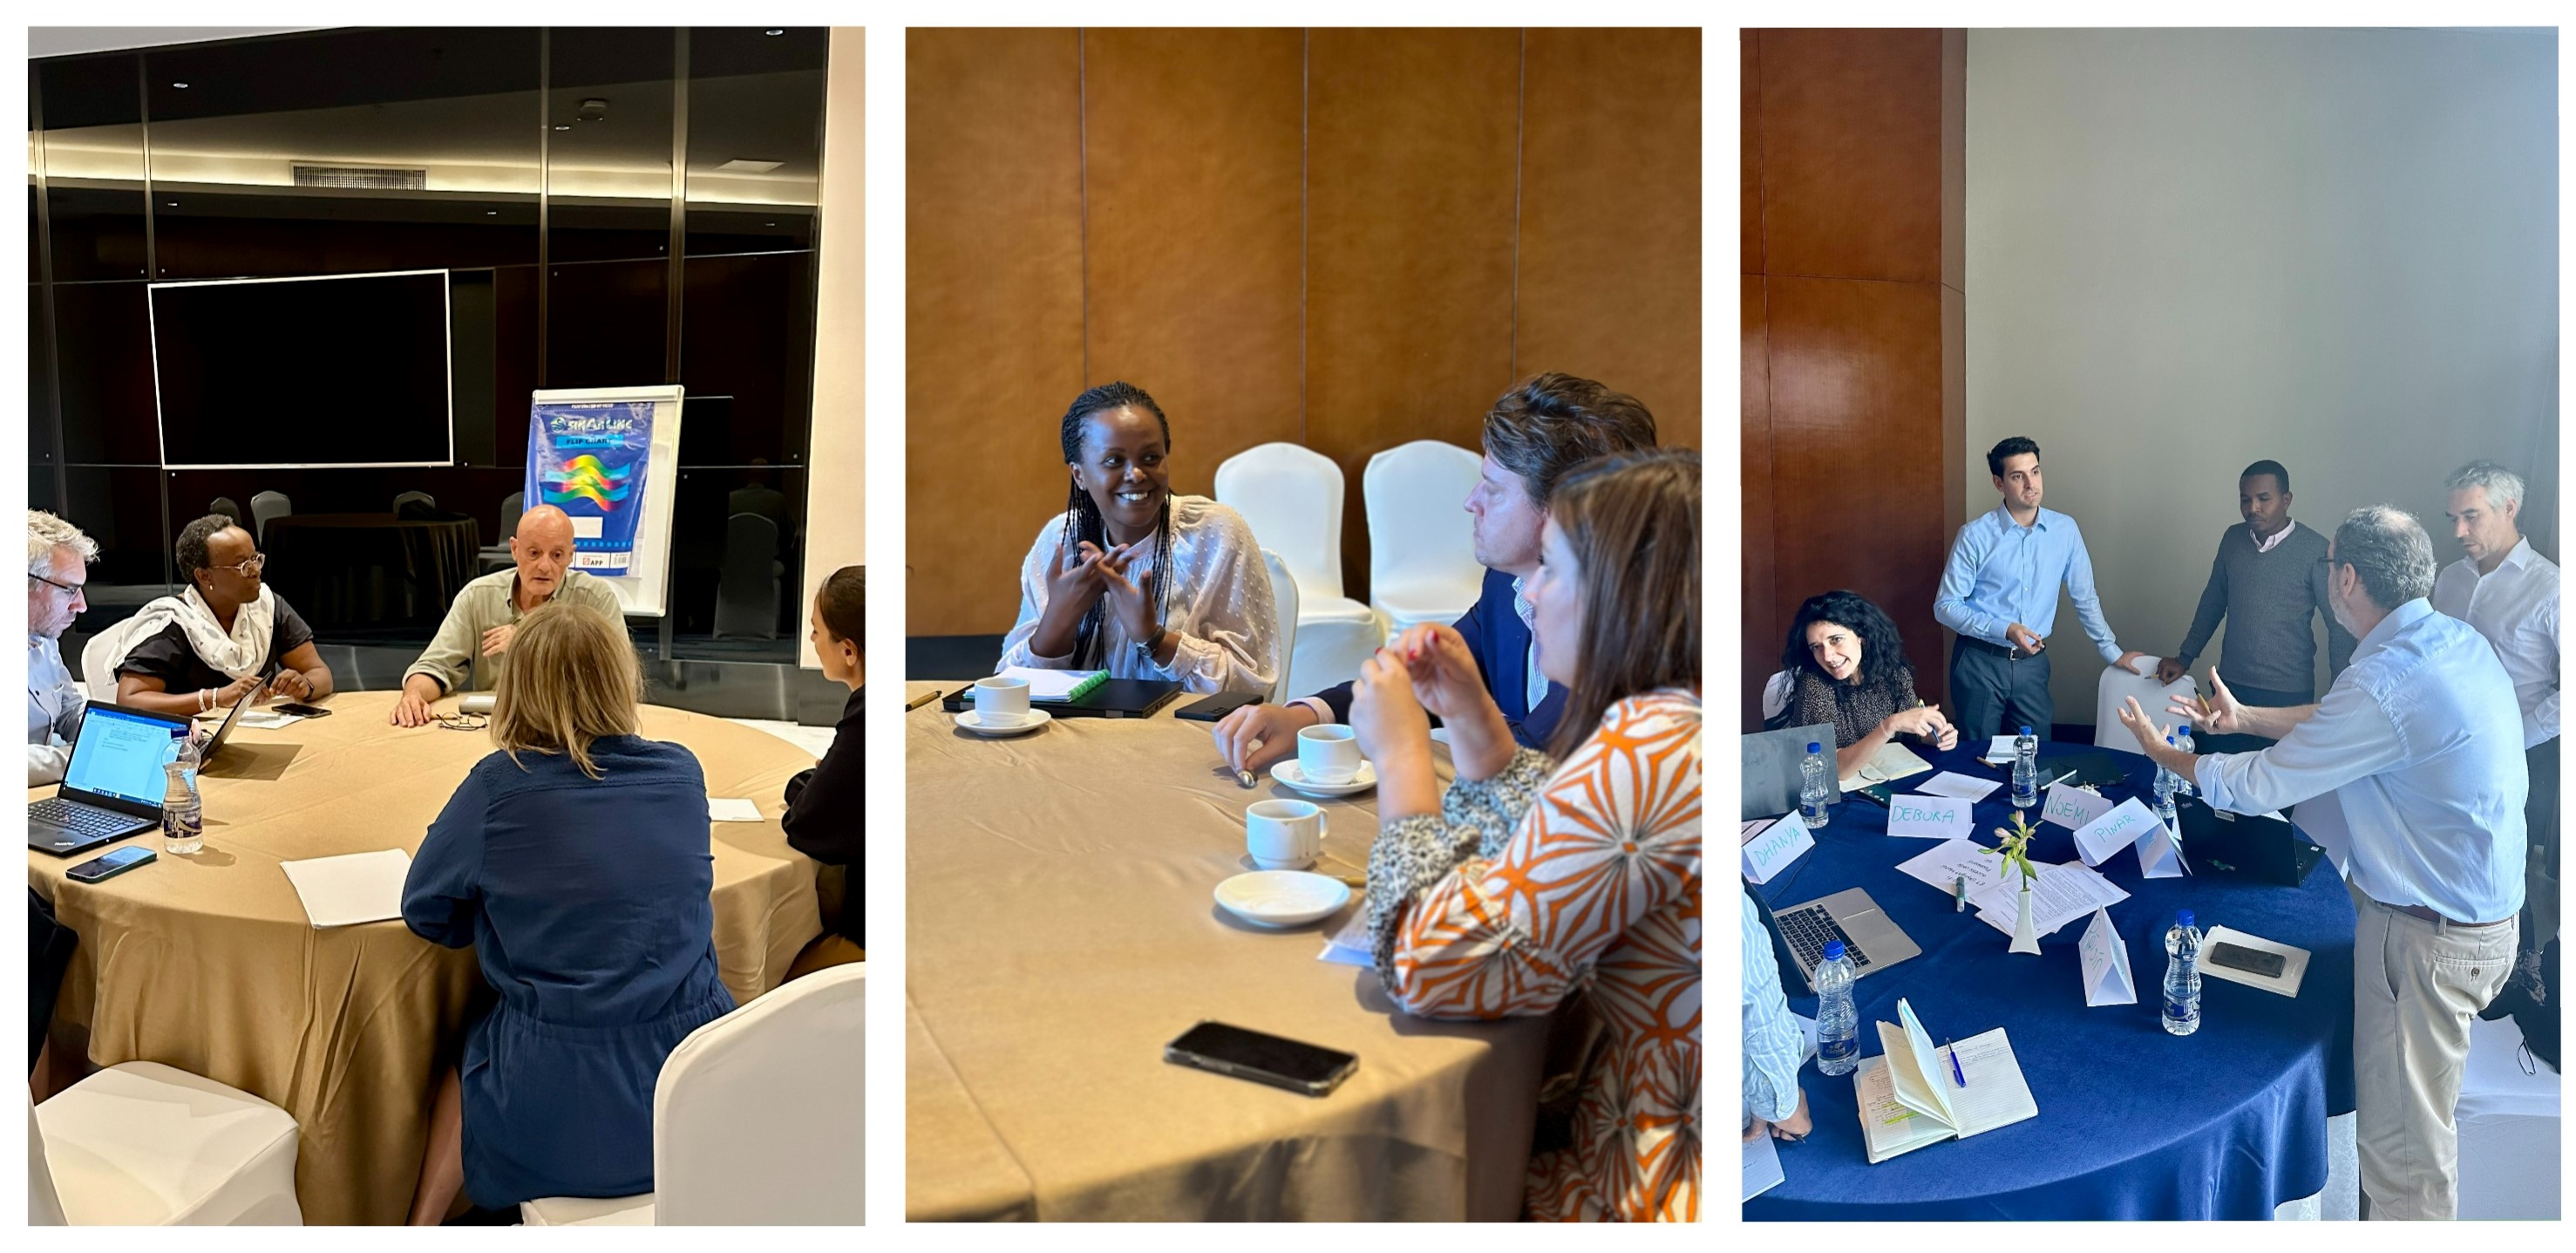 Round table discussions provided an opportunity for sharing experiences © EUTF 